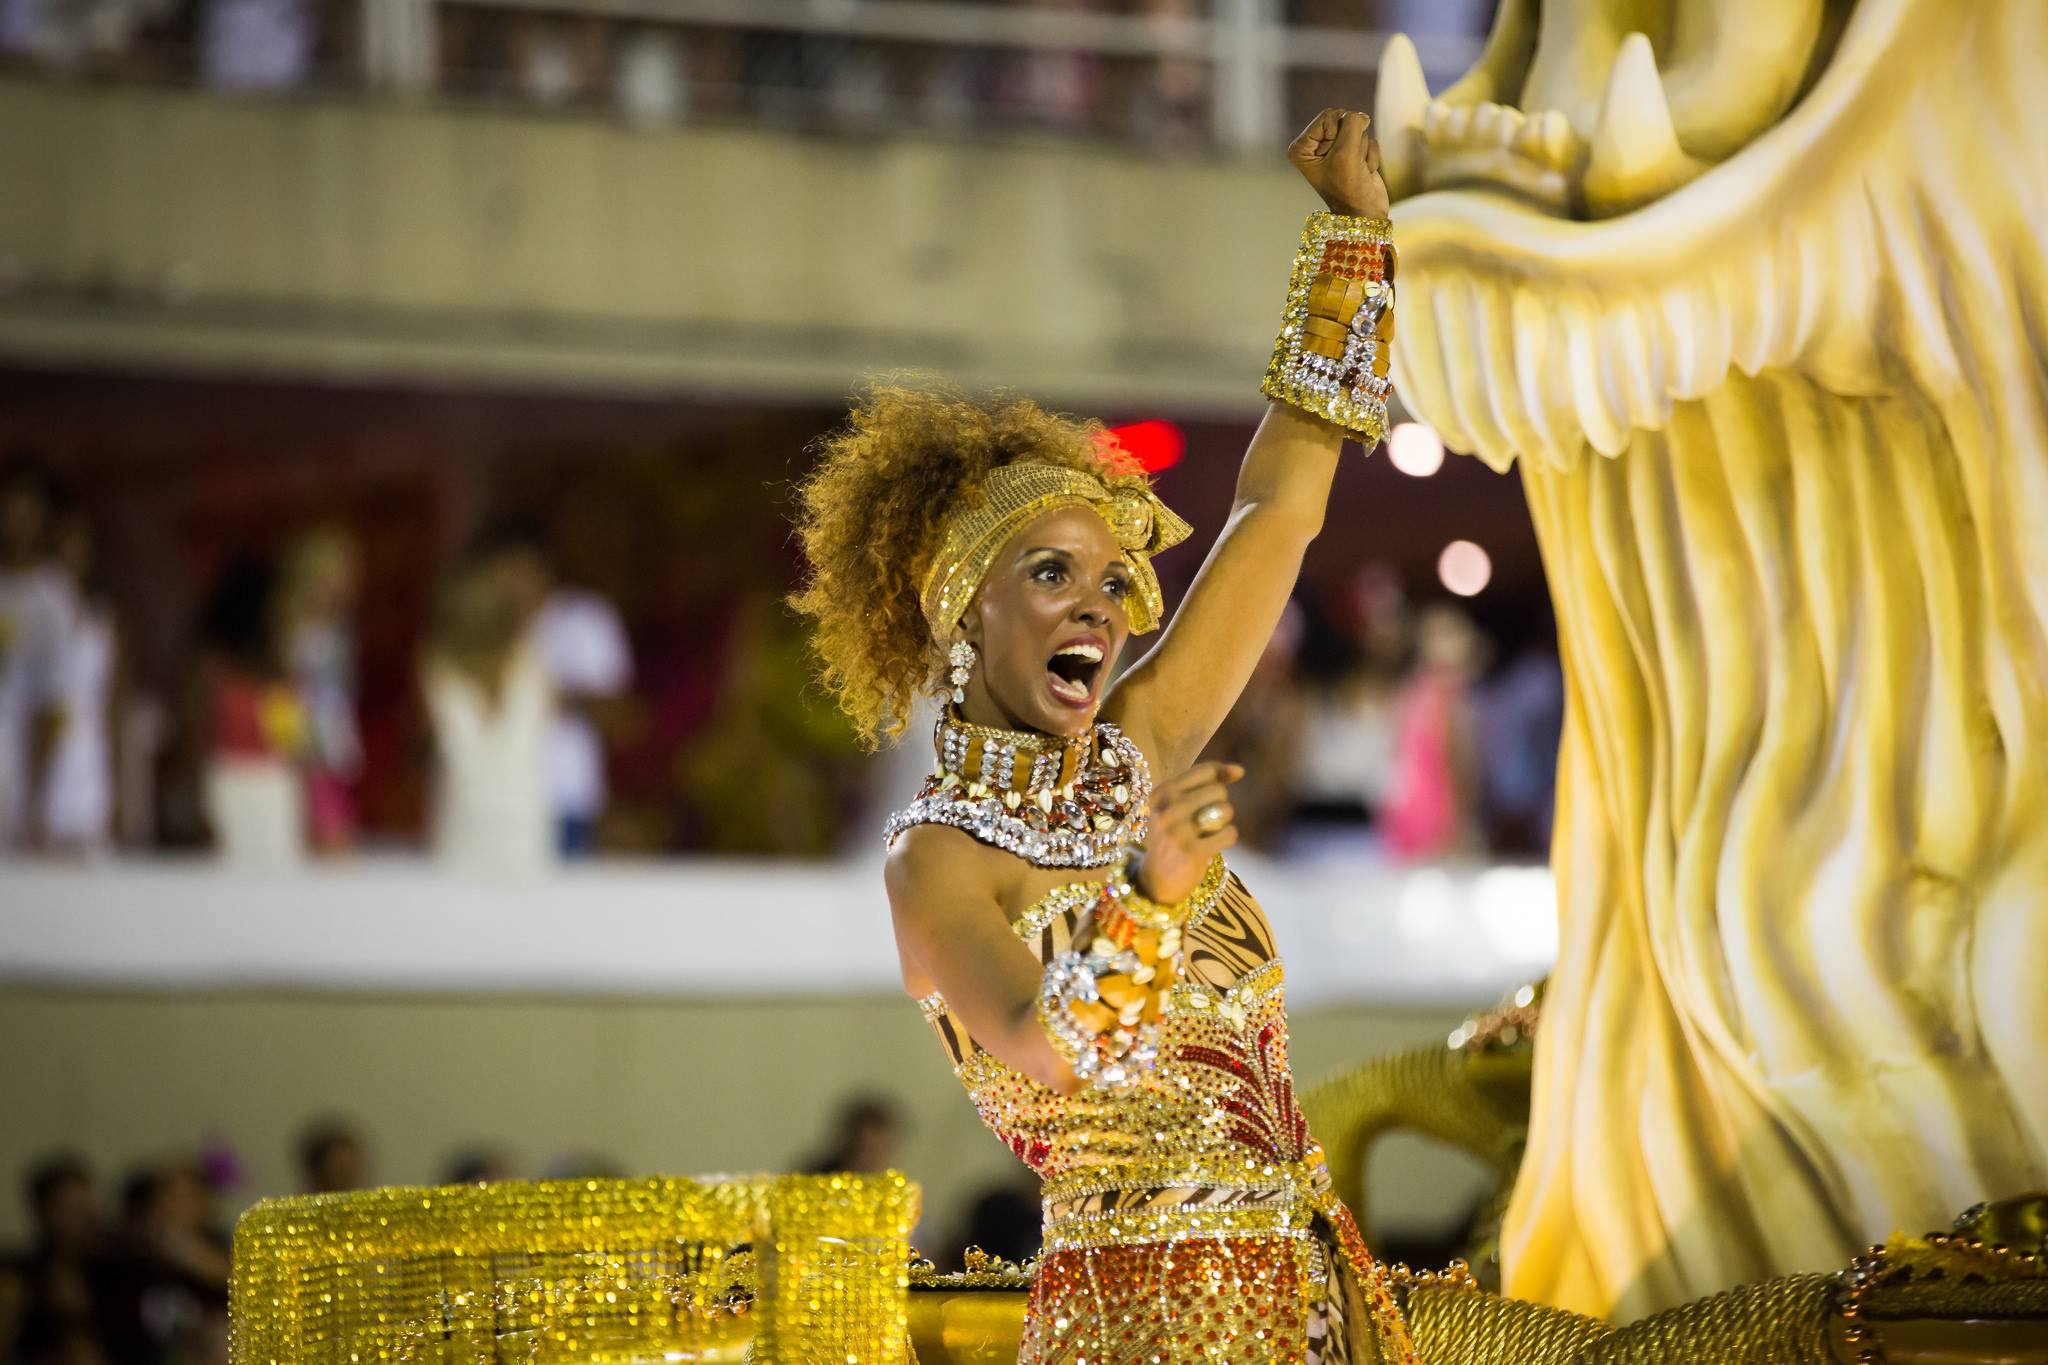 Brazil is cutting budget for Carnival